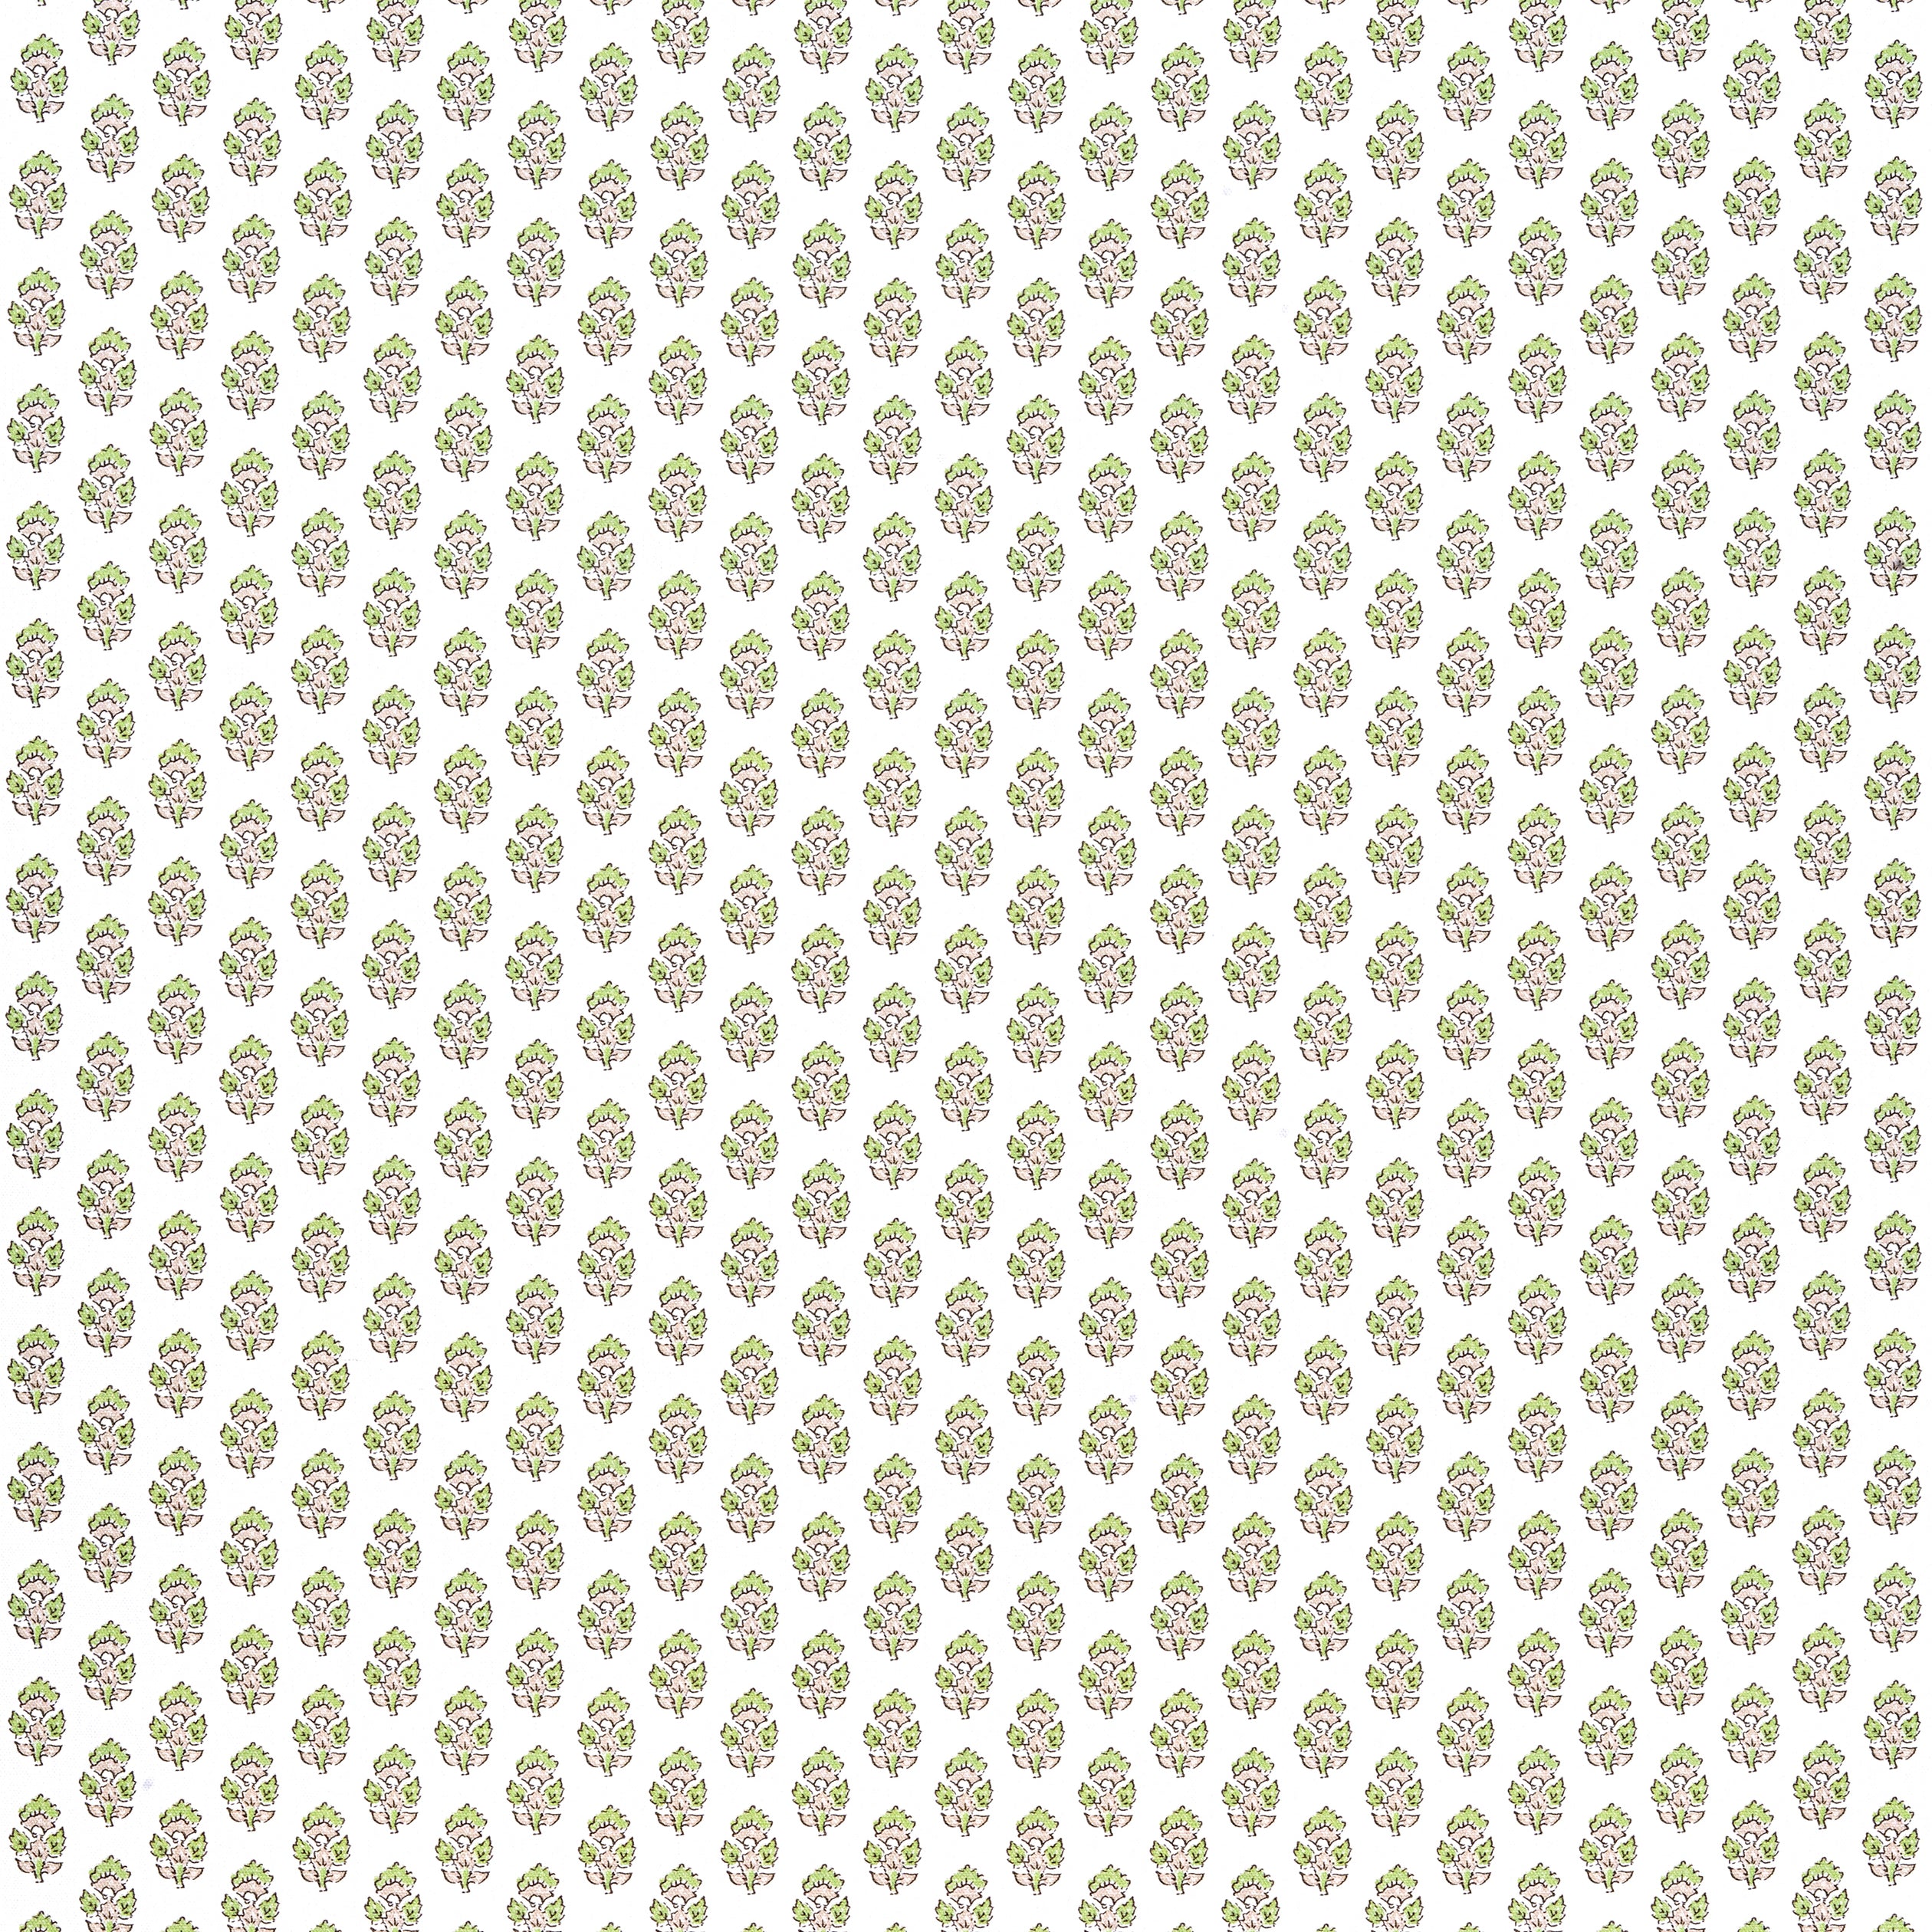 Julian fabric in green and beige color - pattern number AF15167 - by Anna French in the Antilles collection